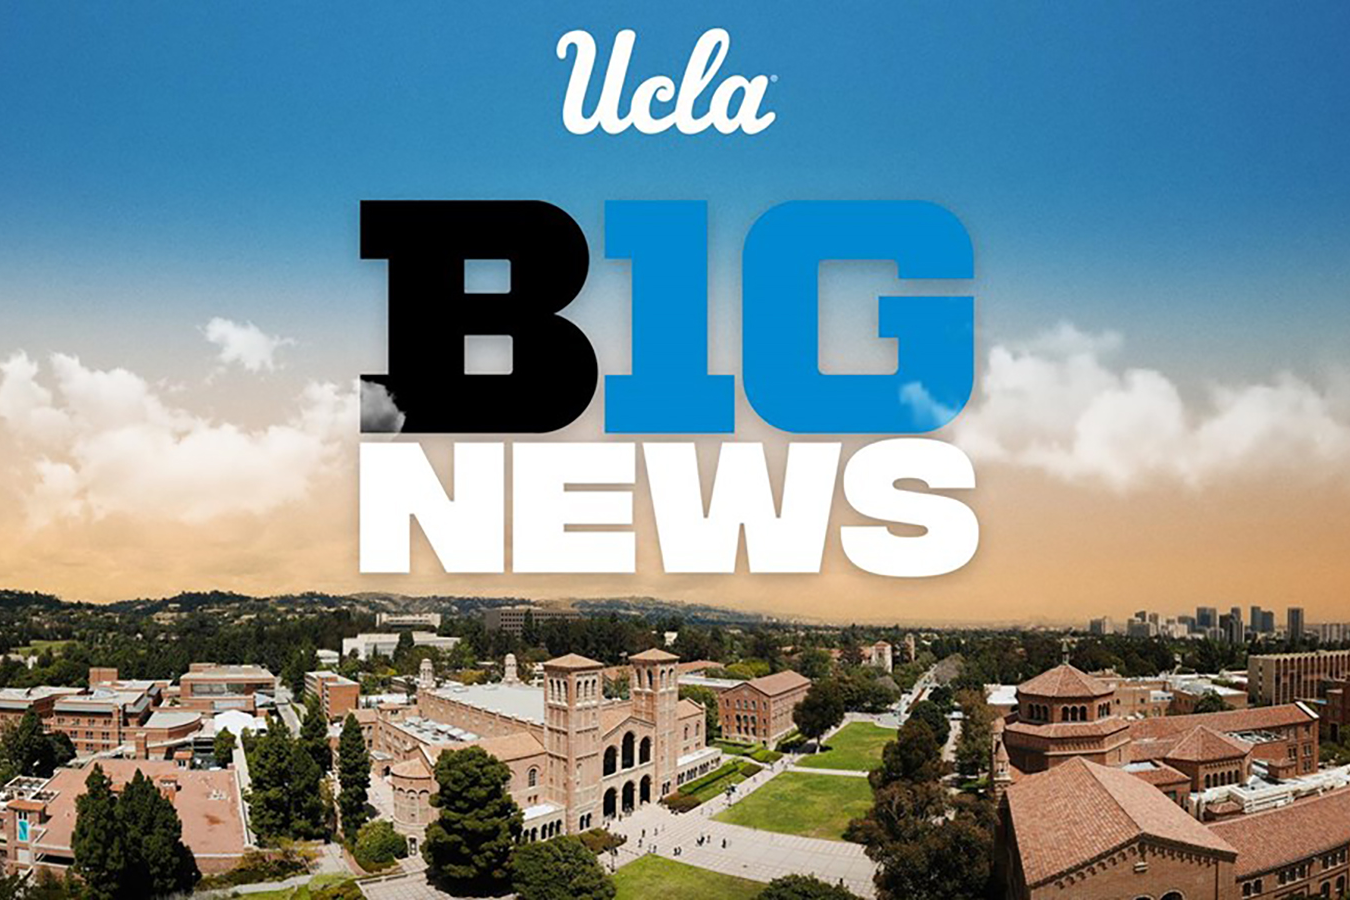 Aerial shot of campus with words "UCLA Big News" overlayed